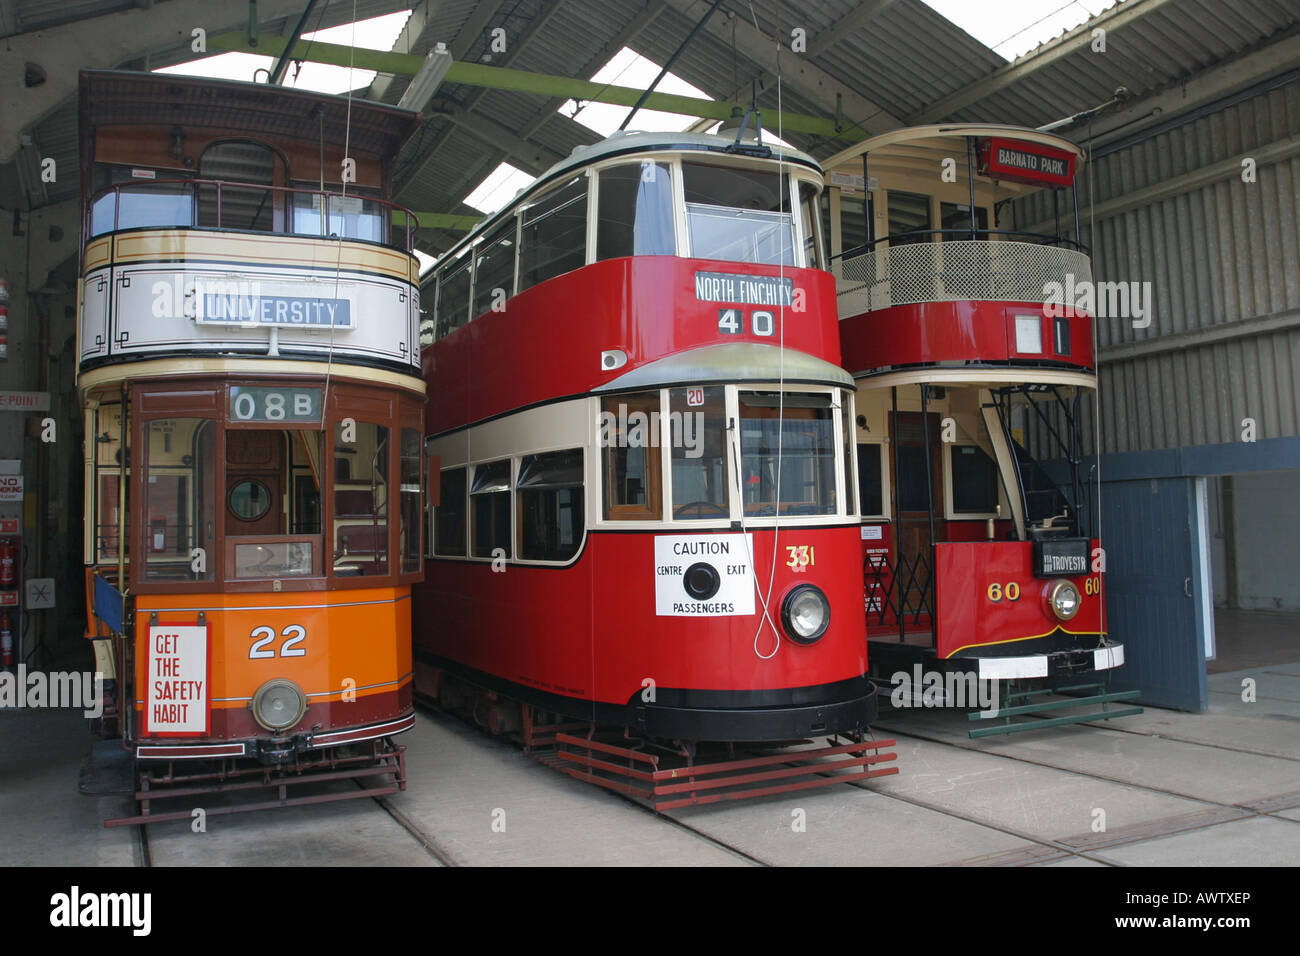 A selection of ex Glasgow (22) London (331) and Johannesburg (60) trams in the tramshed at Crich Tramway Museum, Derbyshire UK Stock Photo